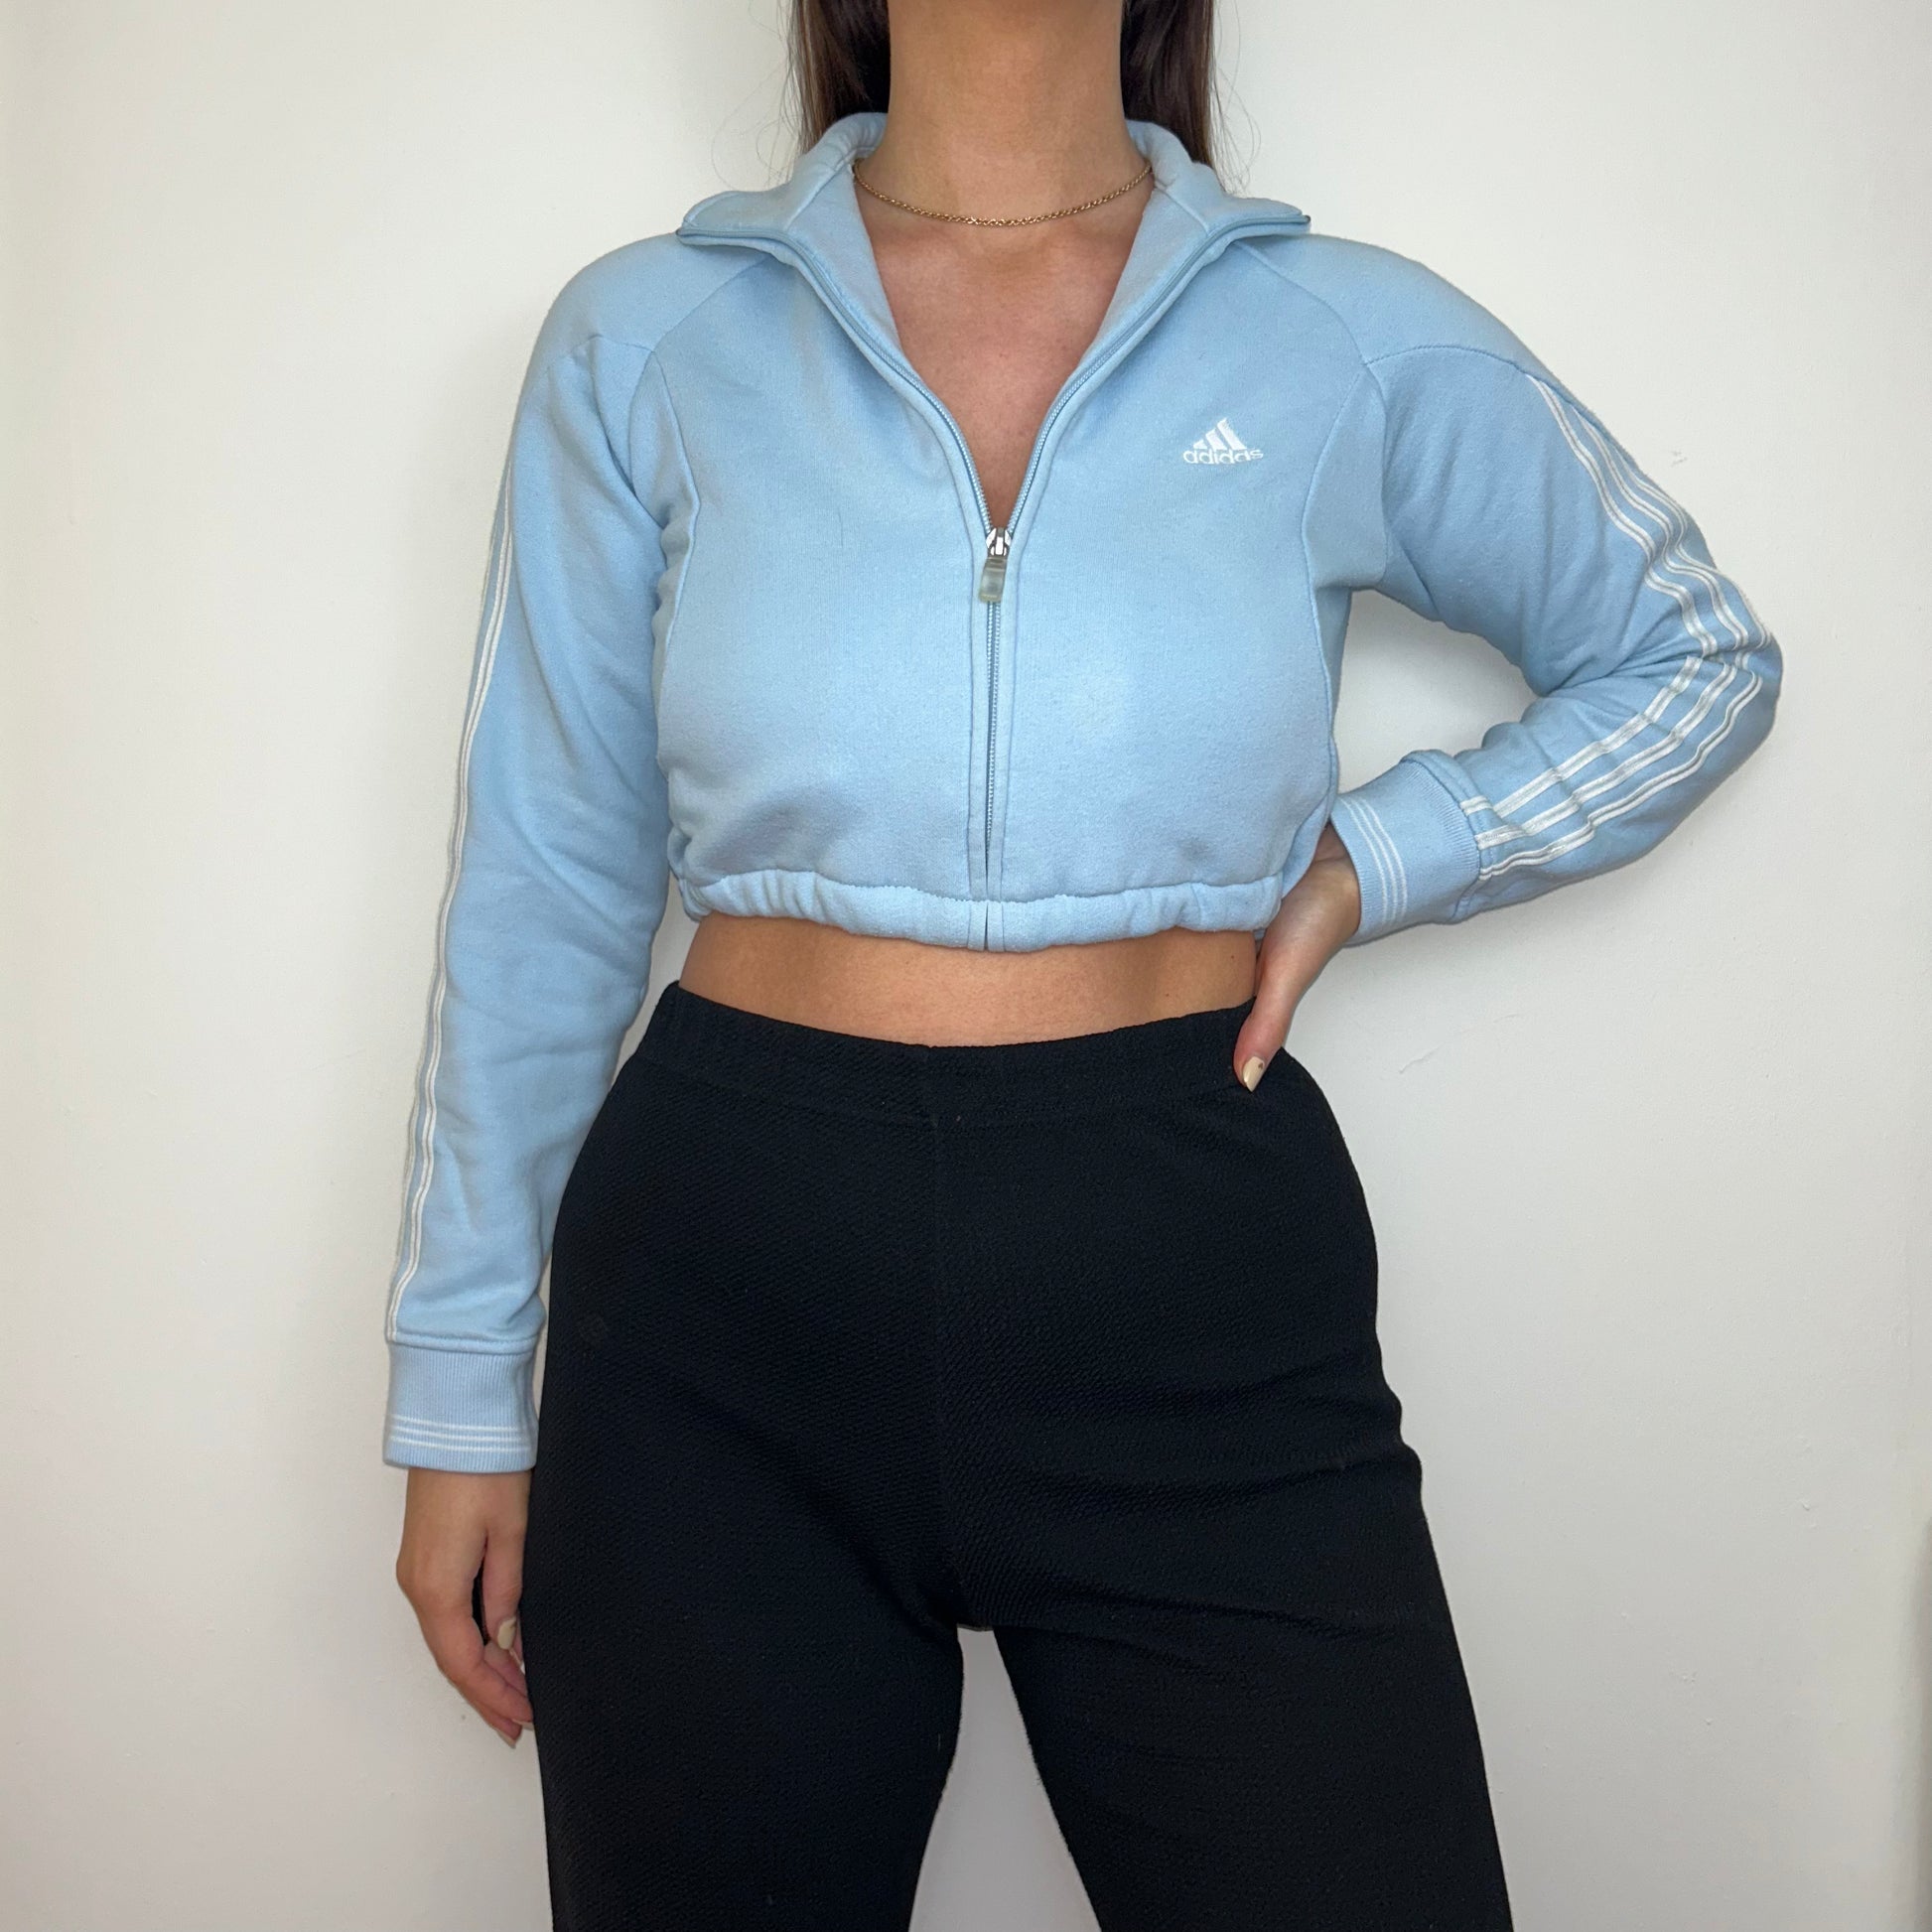 light blue 1/4 zip cropped sweatshirt with white adidas logo shown on a model wearing black trousers